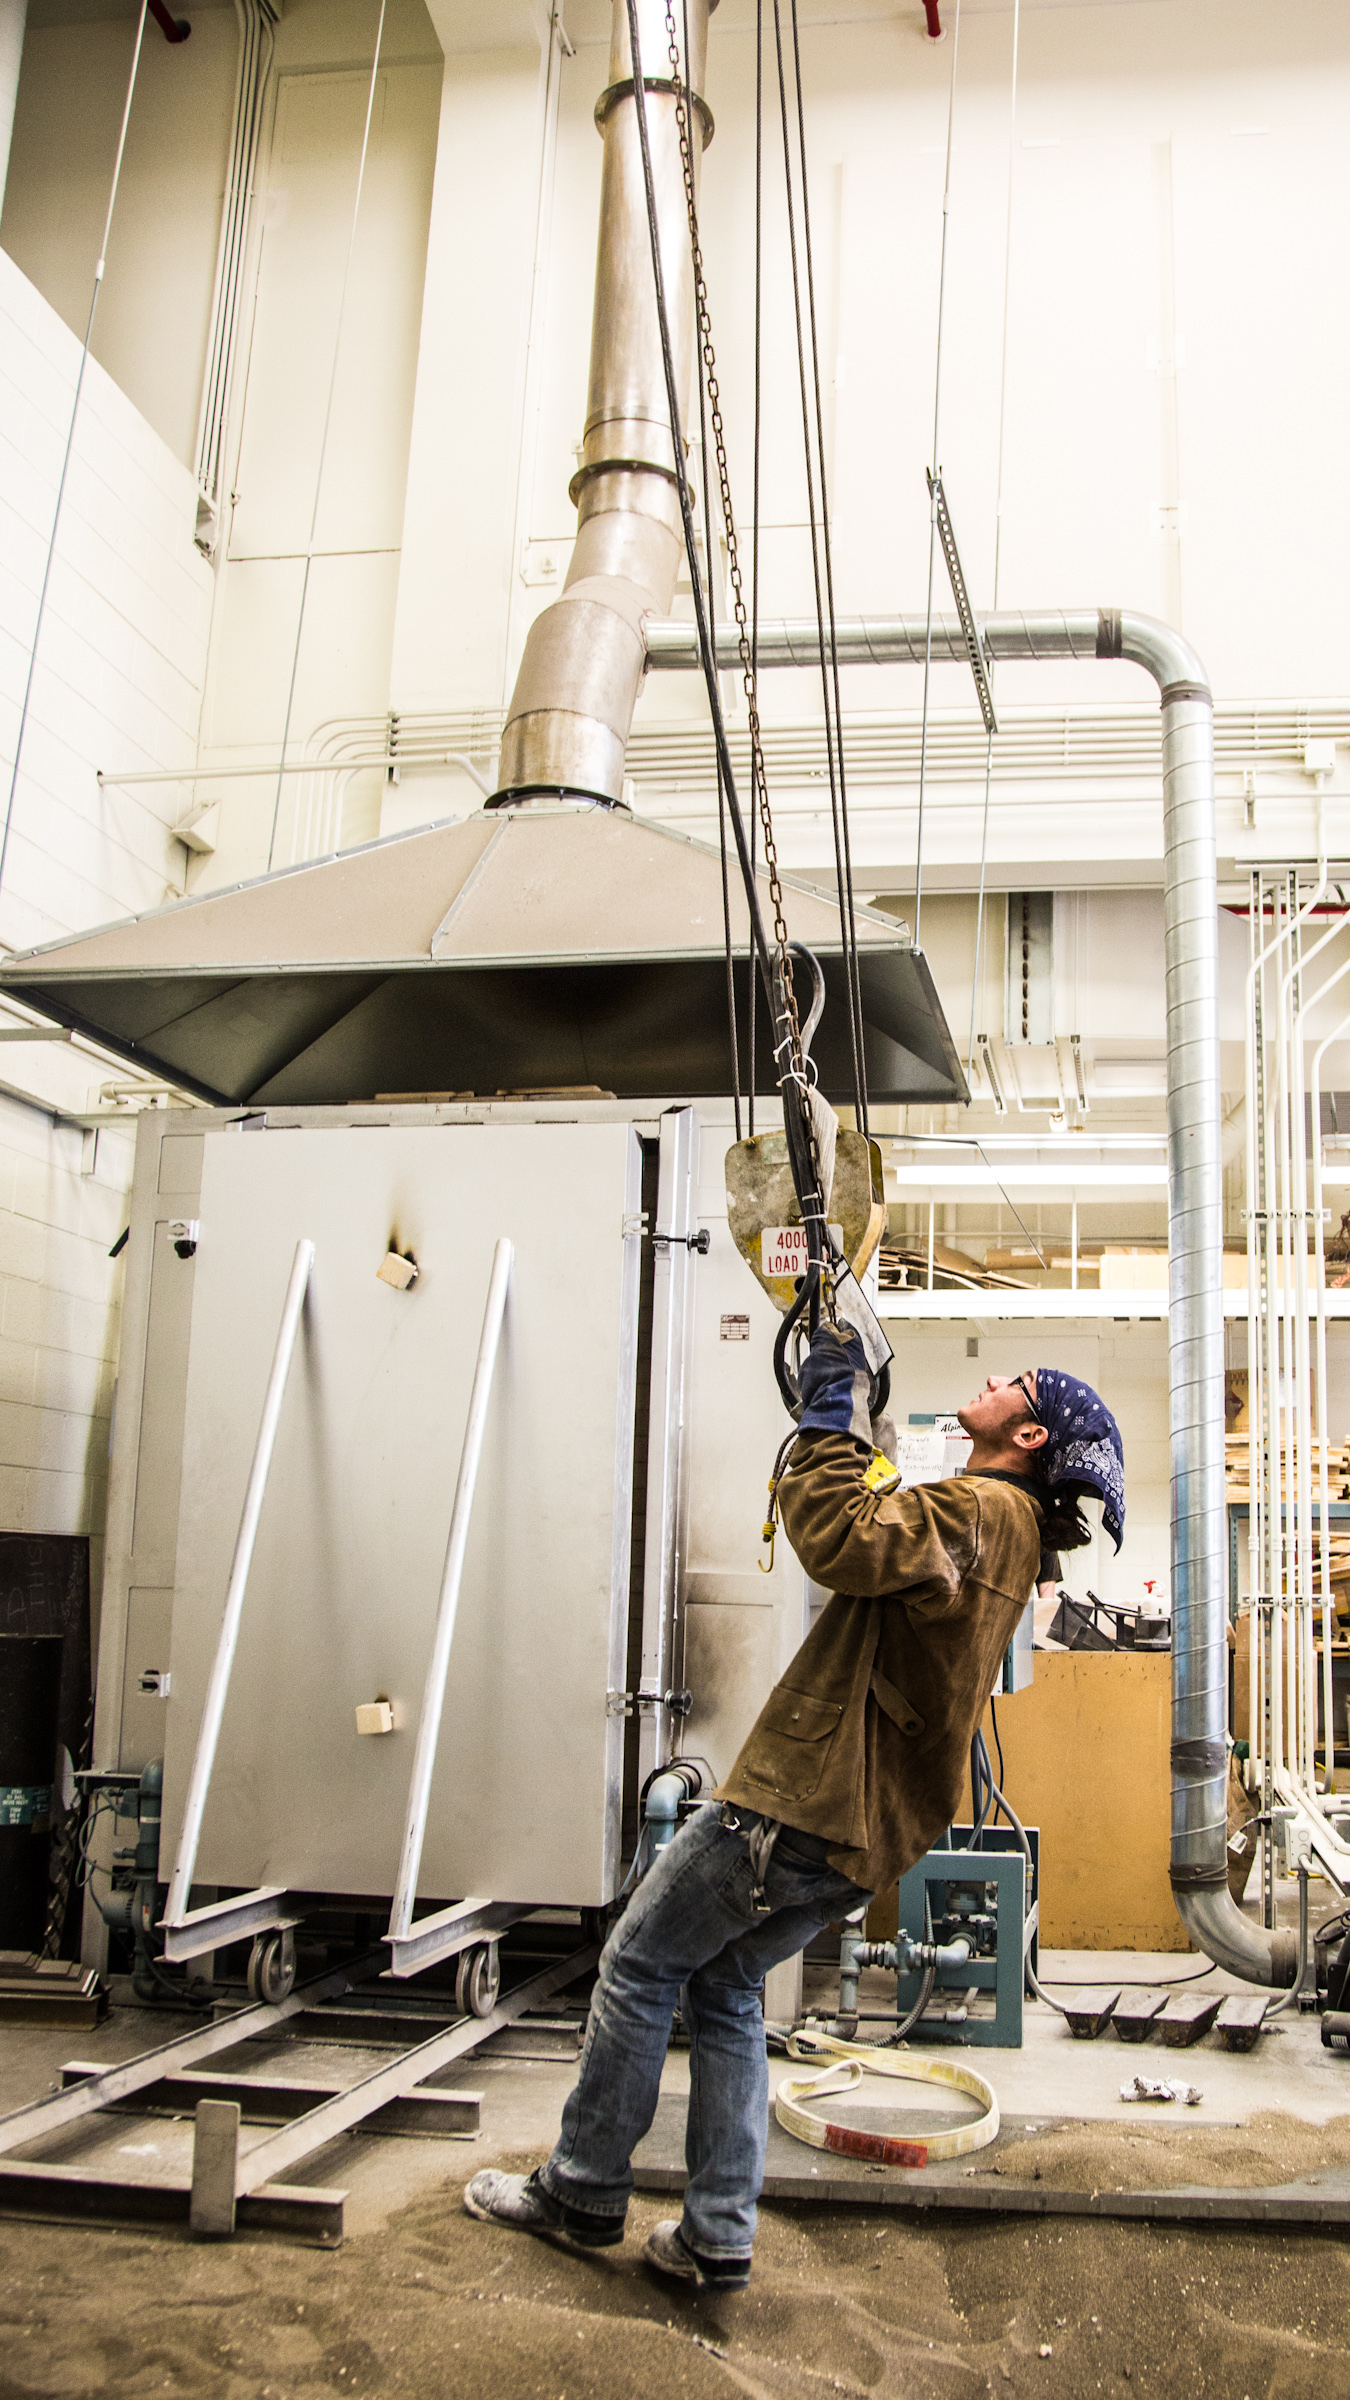 Art major Joel Isaak positions equipment prior to pouring molten bronze as part of the process of creating a life-sized sculpture for his senior thesis in the UAF Fine Arts complex. | UAF Photo by Todd Paris